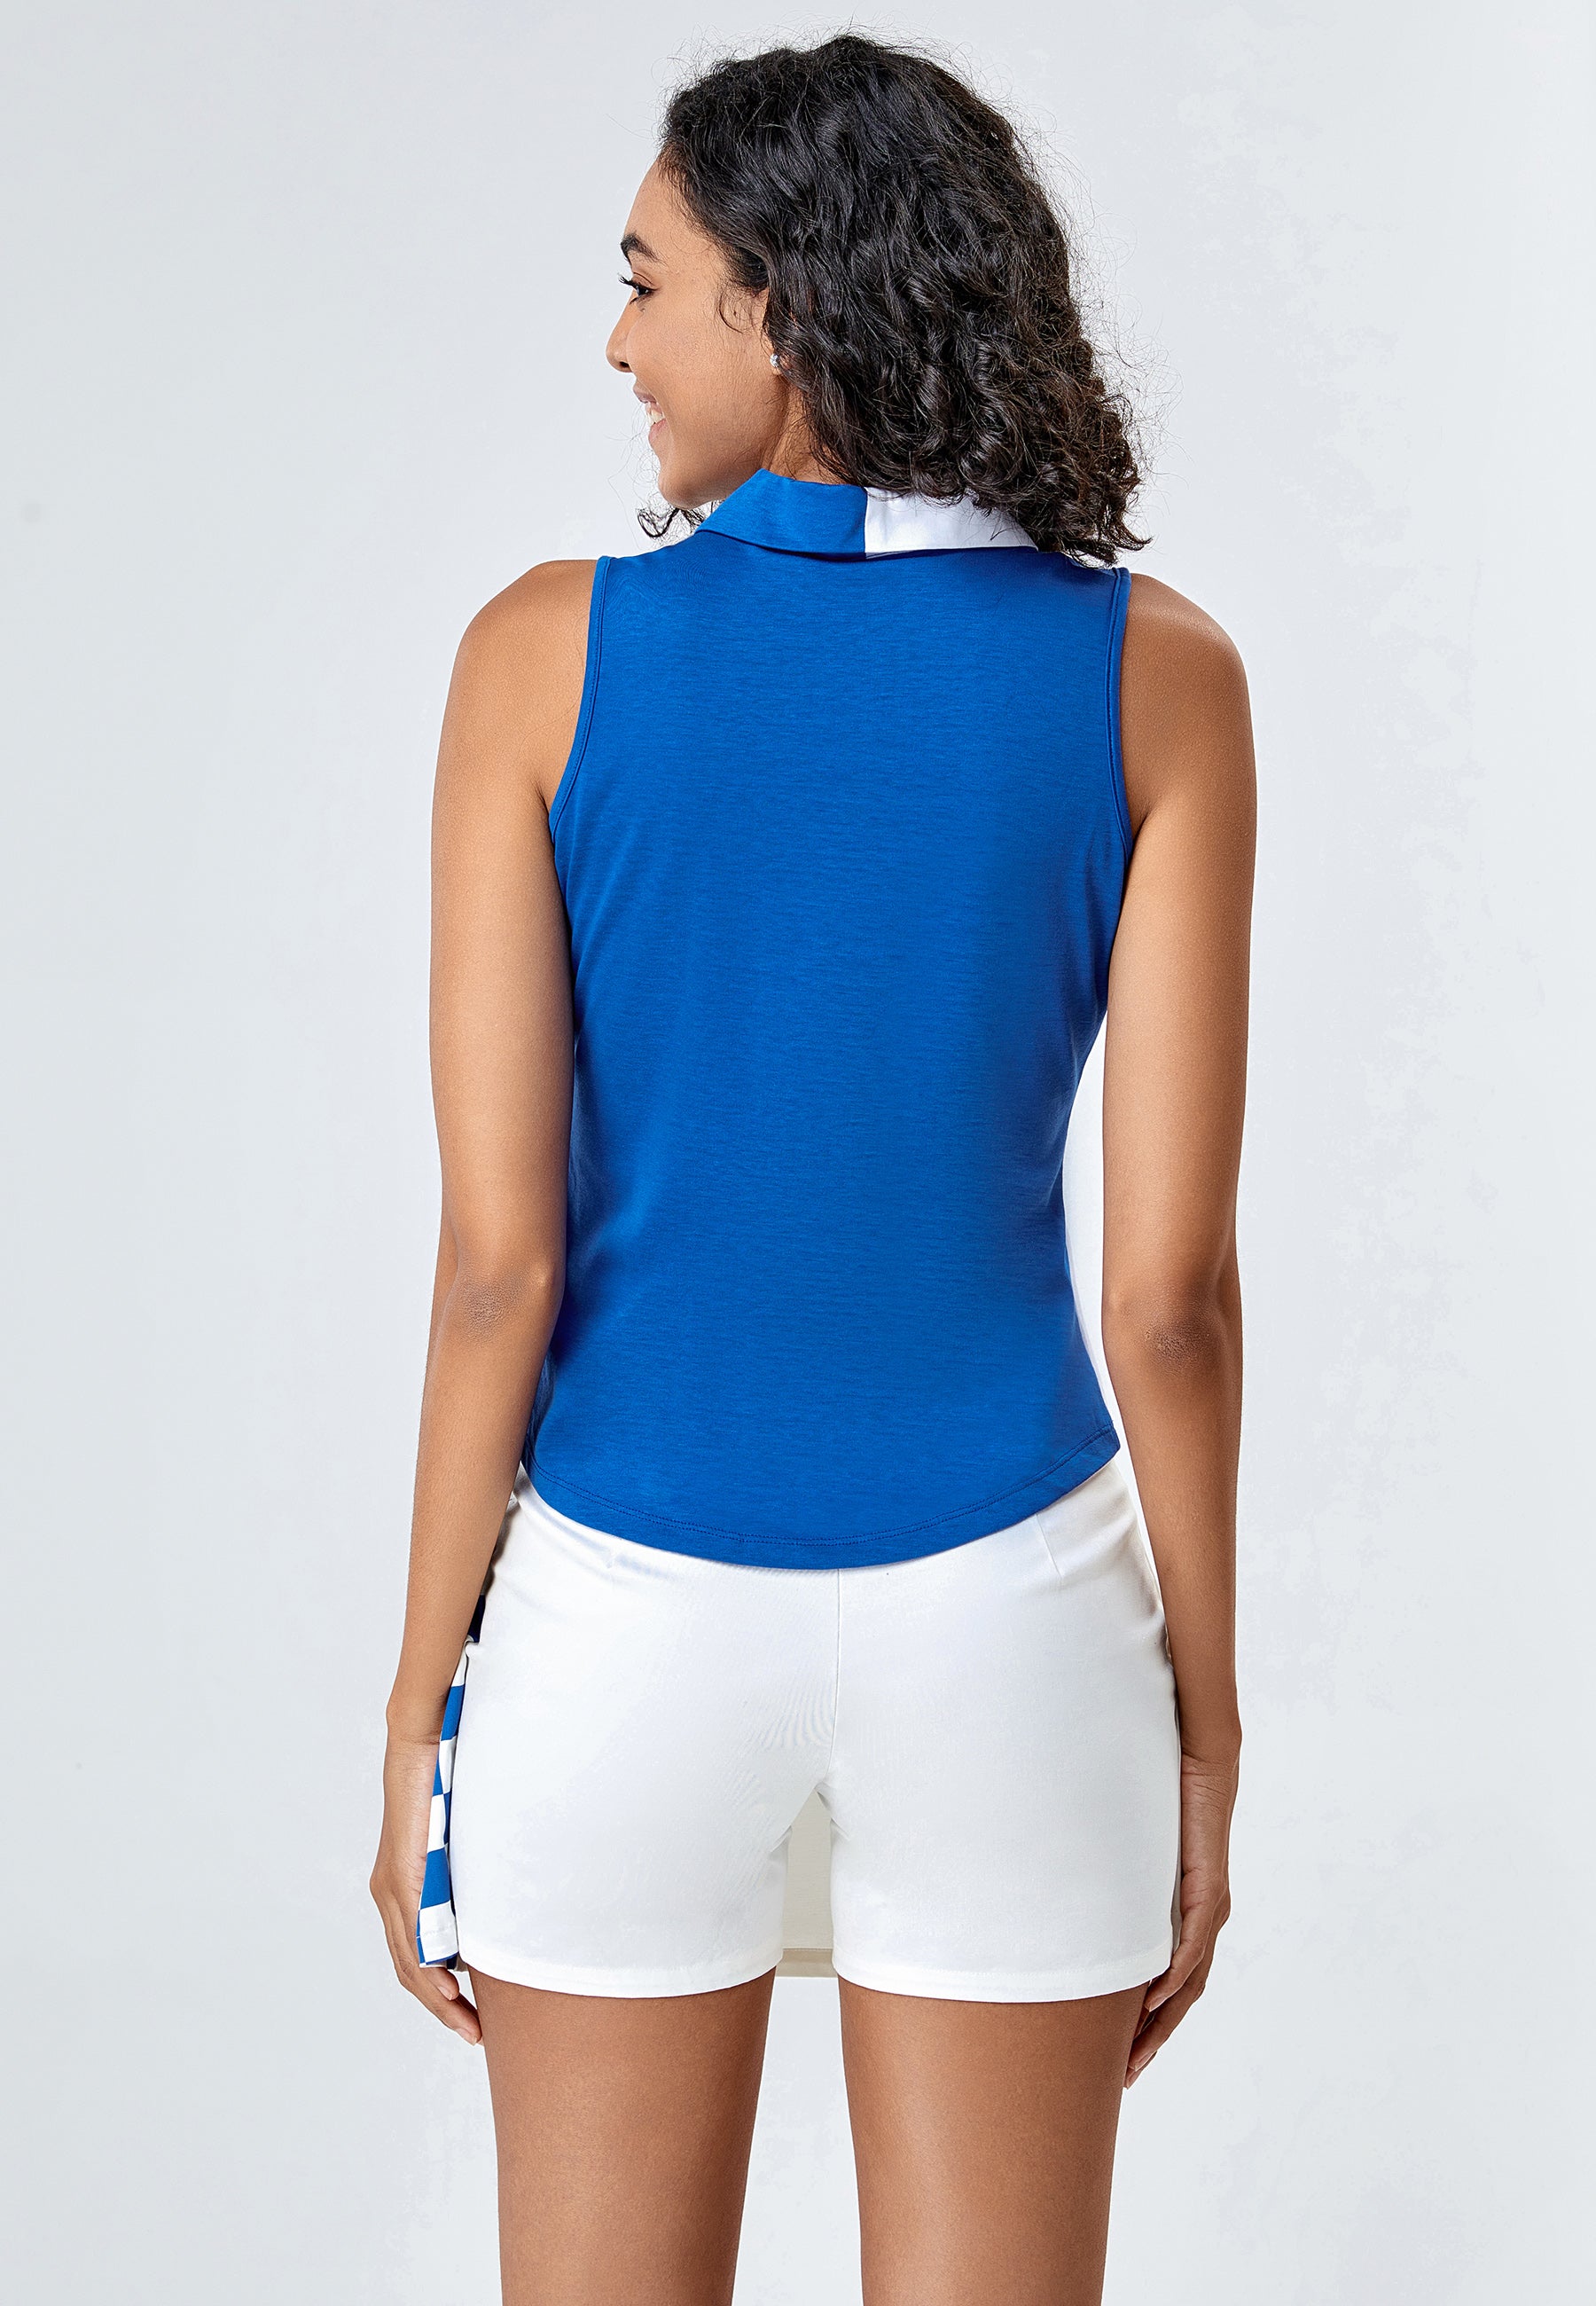 Women’s Collared Two-Tone Vest